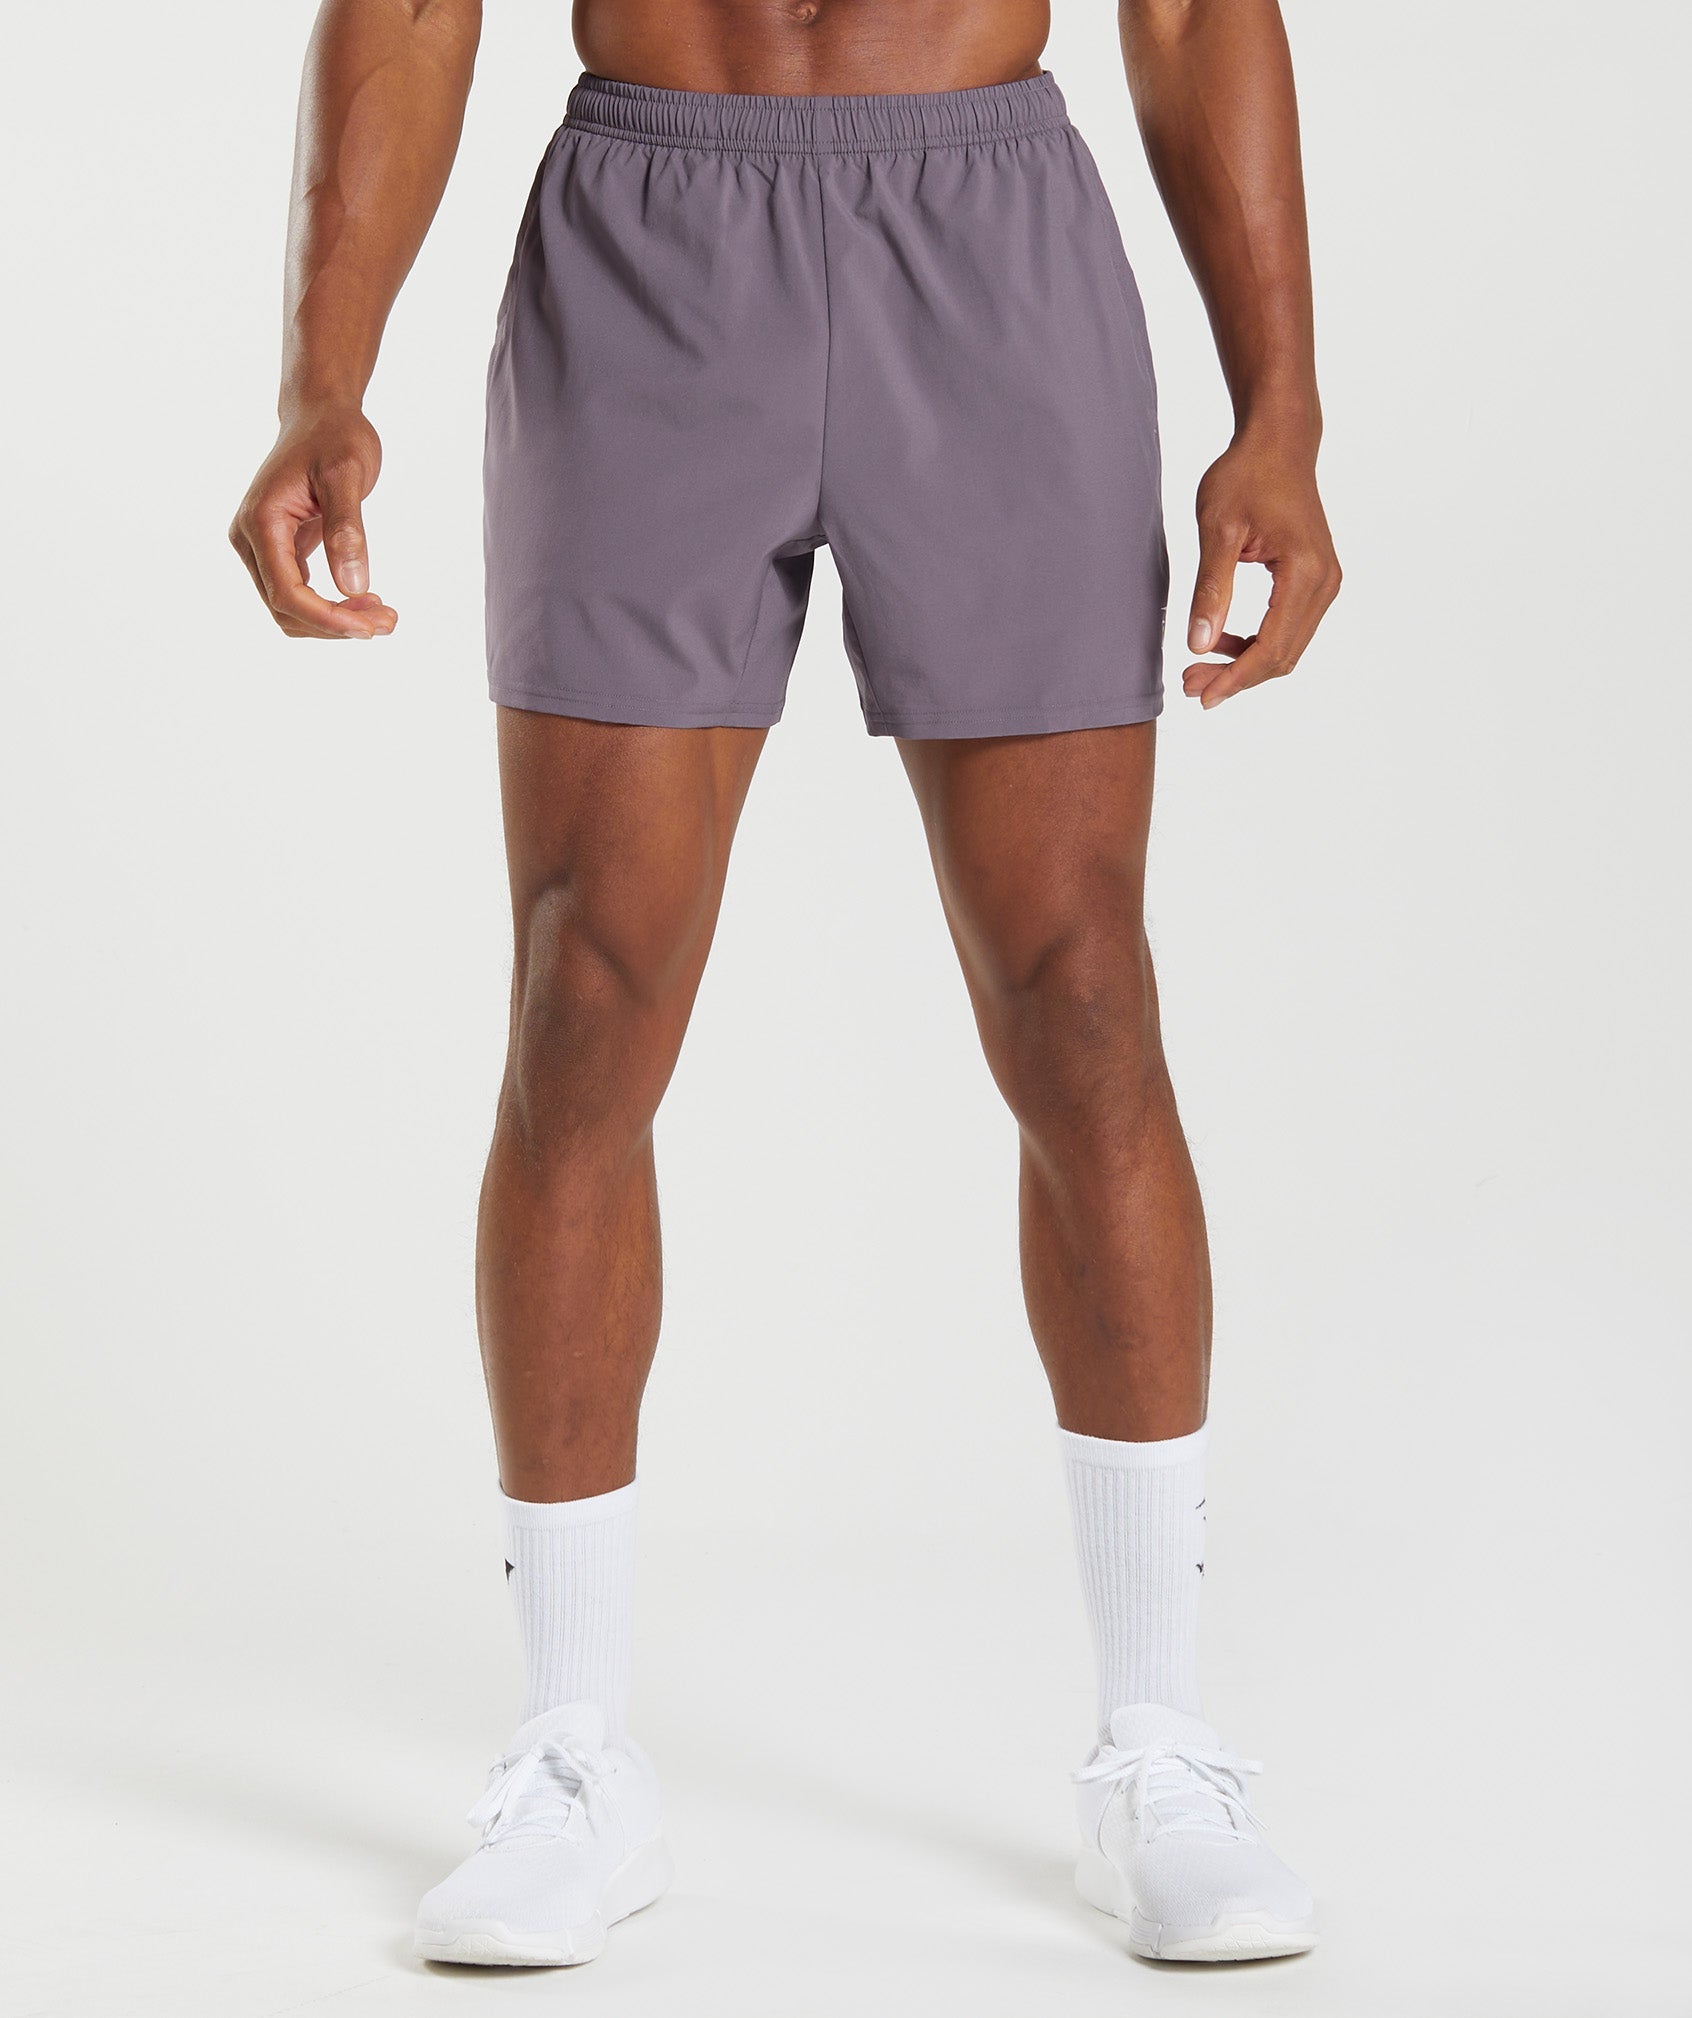 Arrival 5" Shorts in Musk Lilac